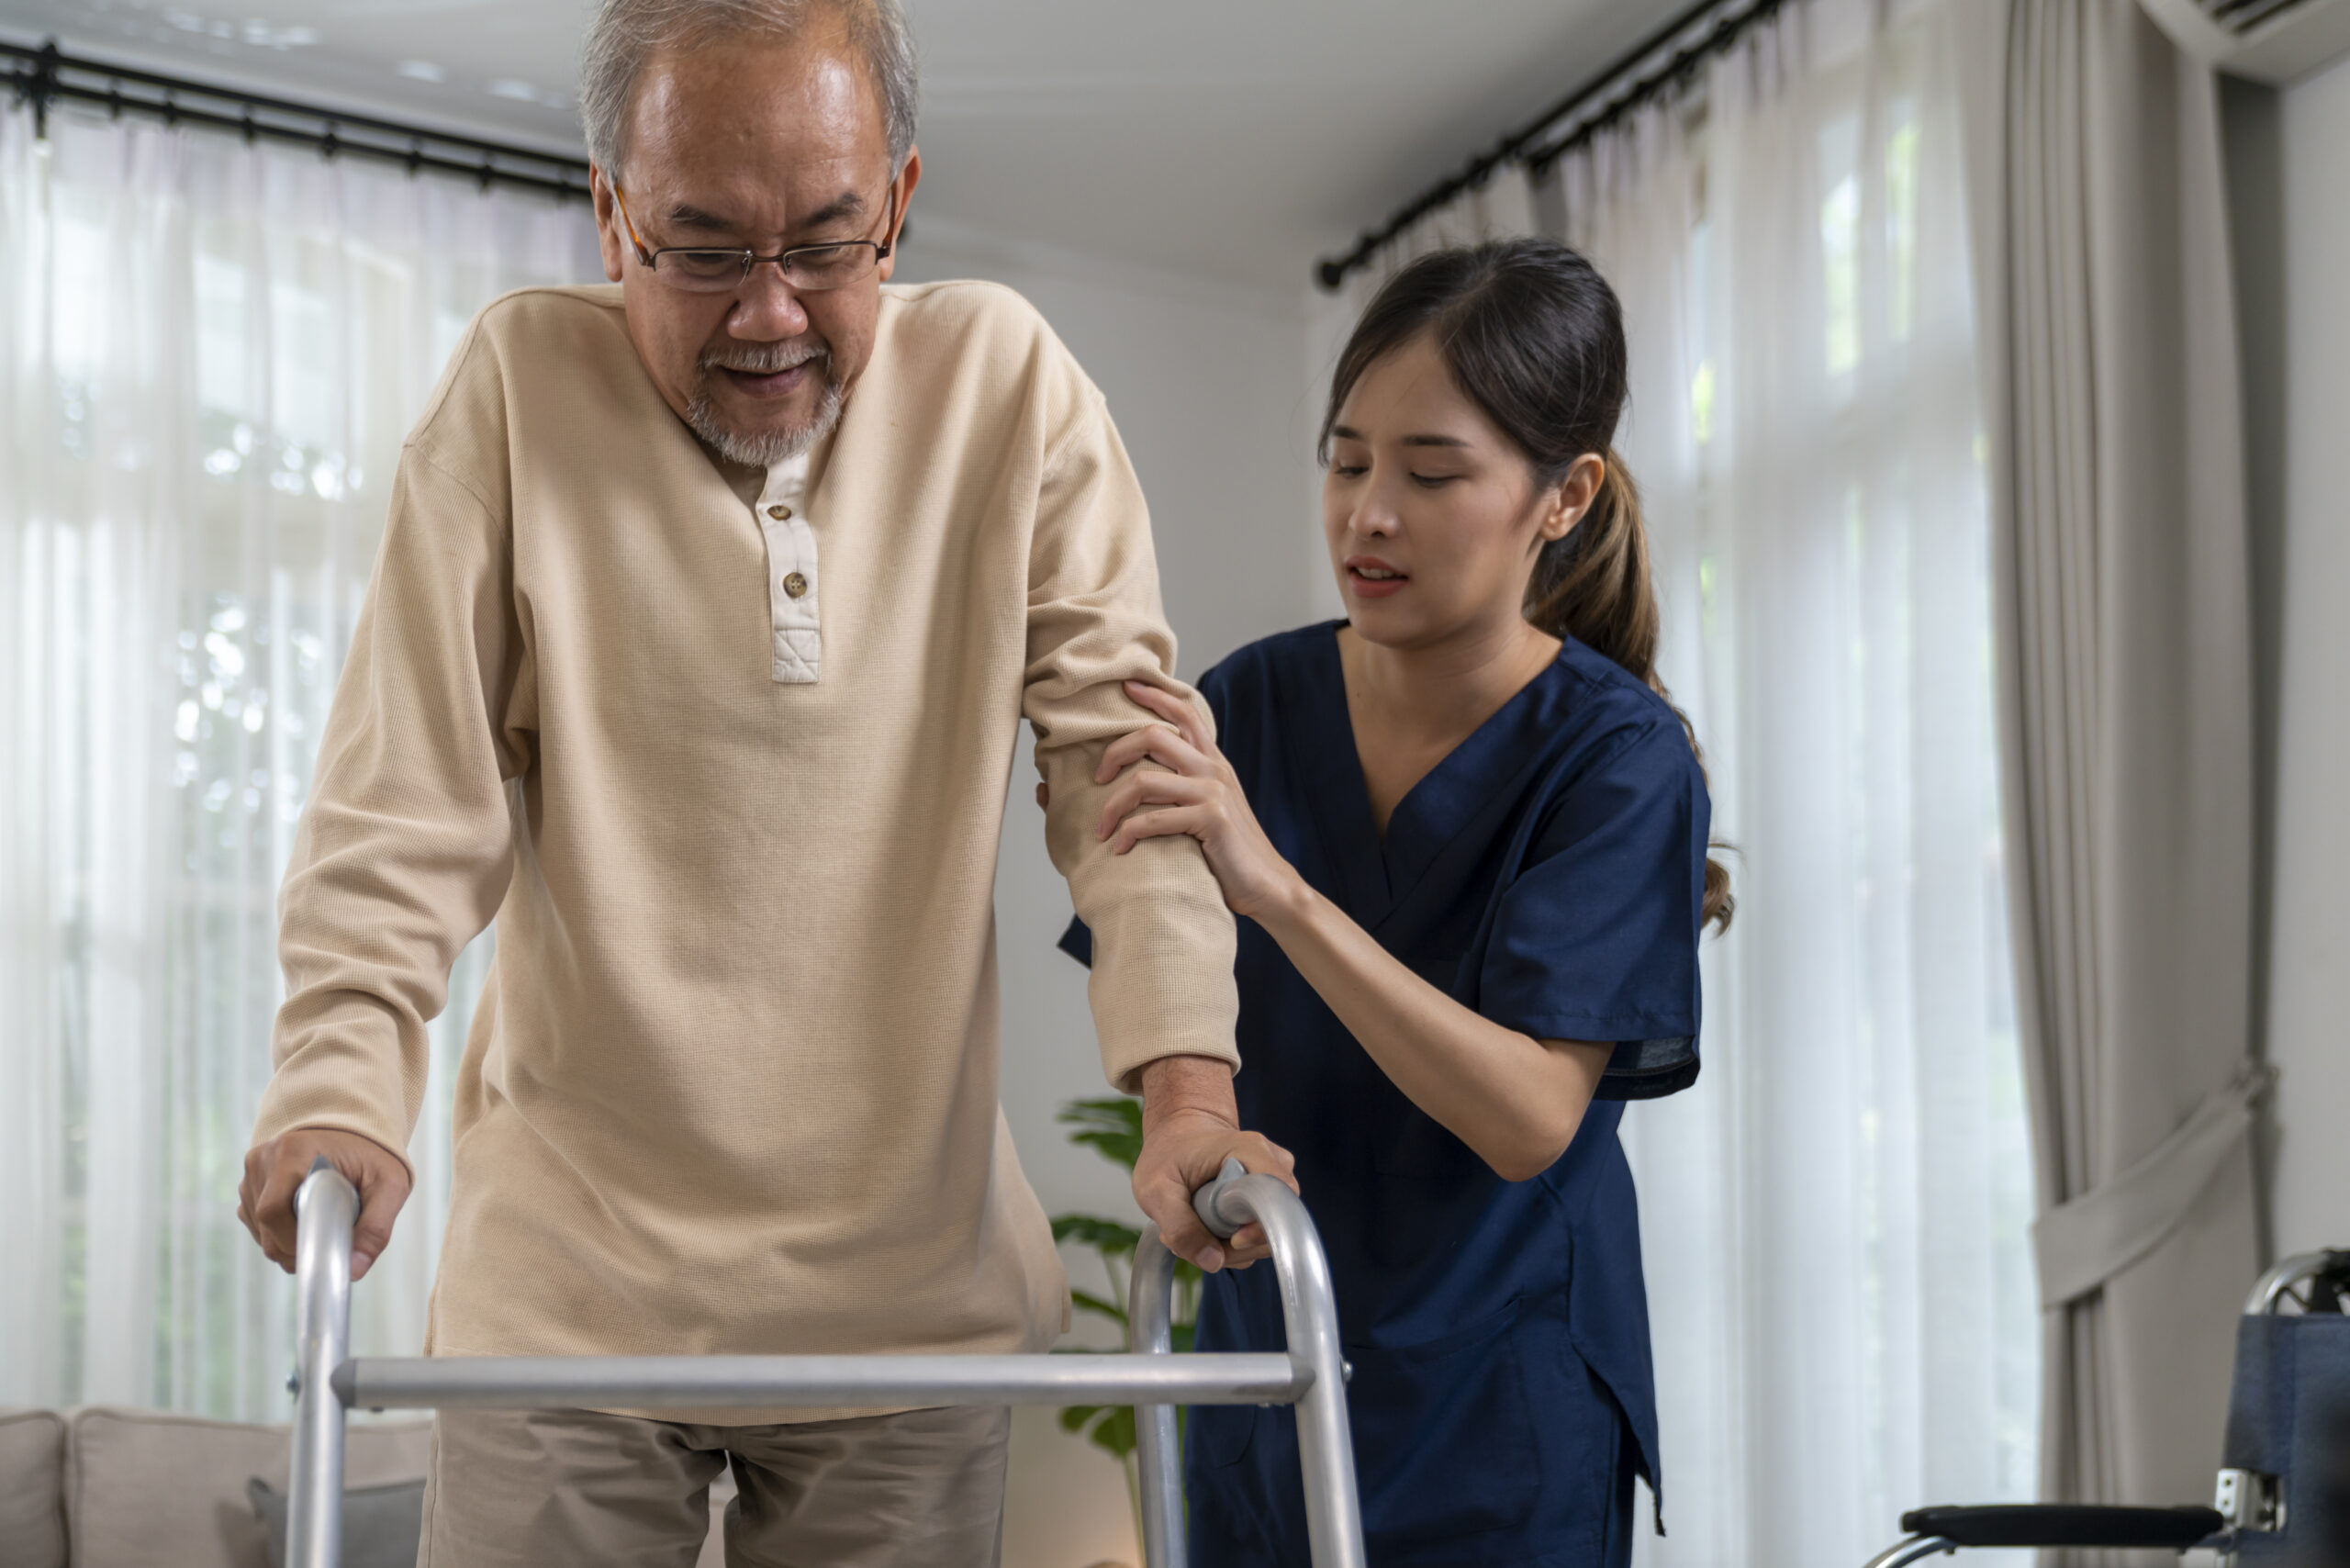 An elderly person using a walker with the assistance of a caregiver. Alt text: "Elderly individual improving mobility with the aid of a walker and caregiver support. | private carers for the elderly